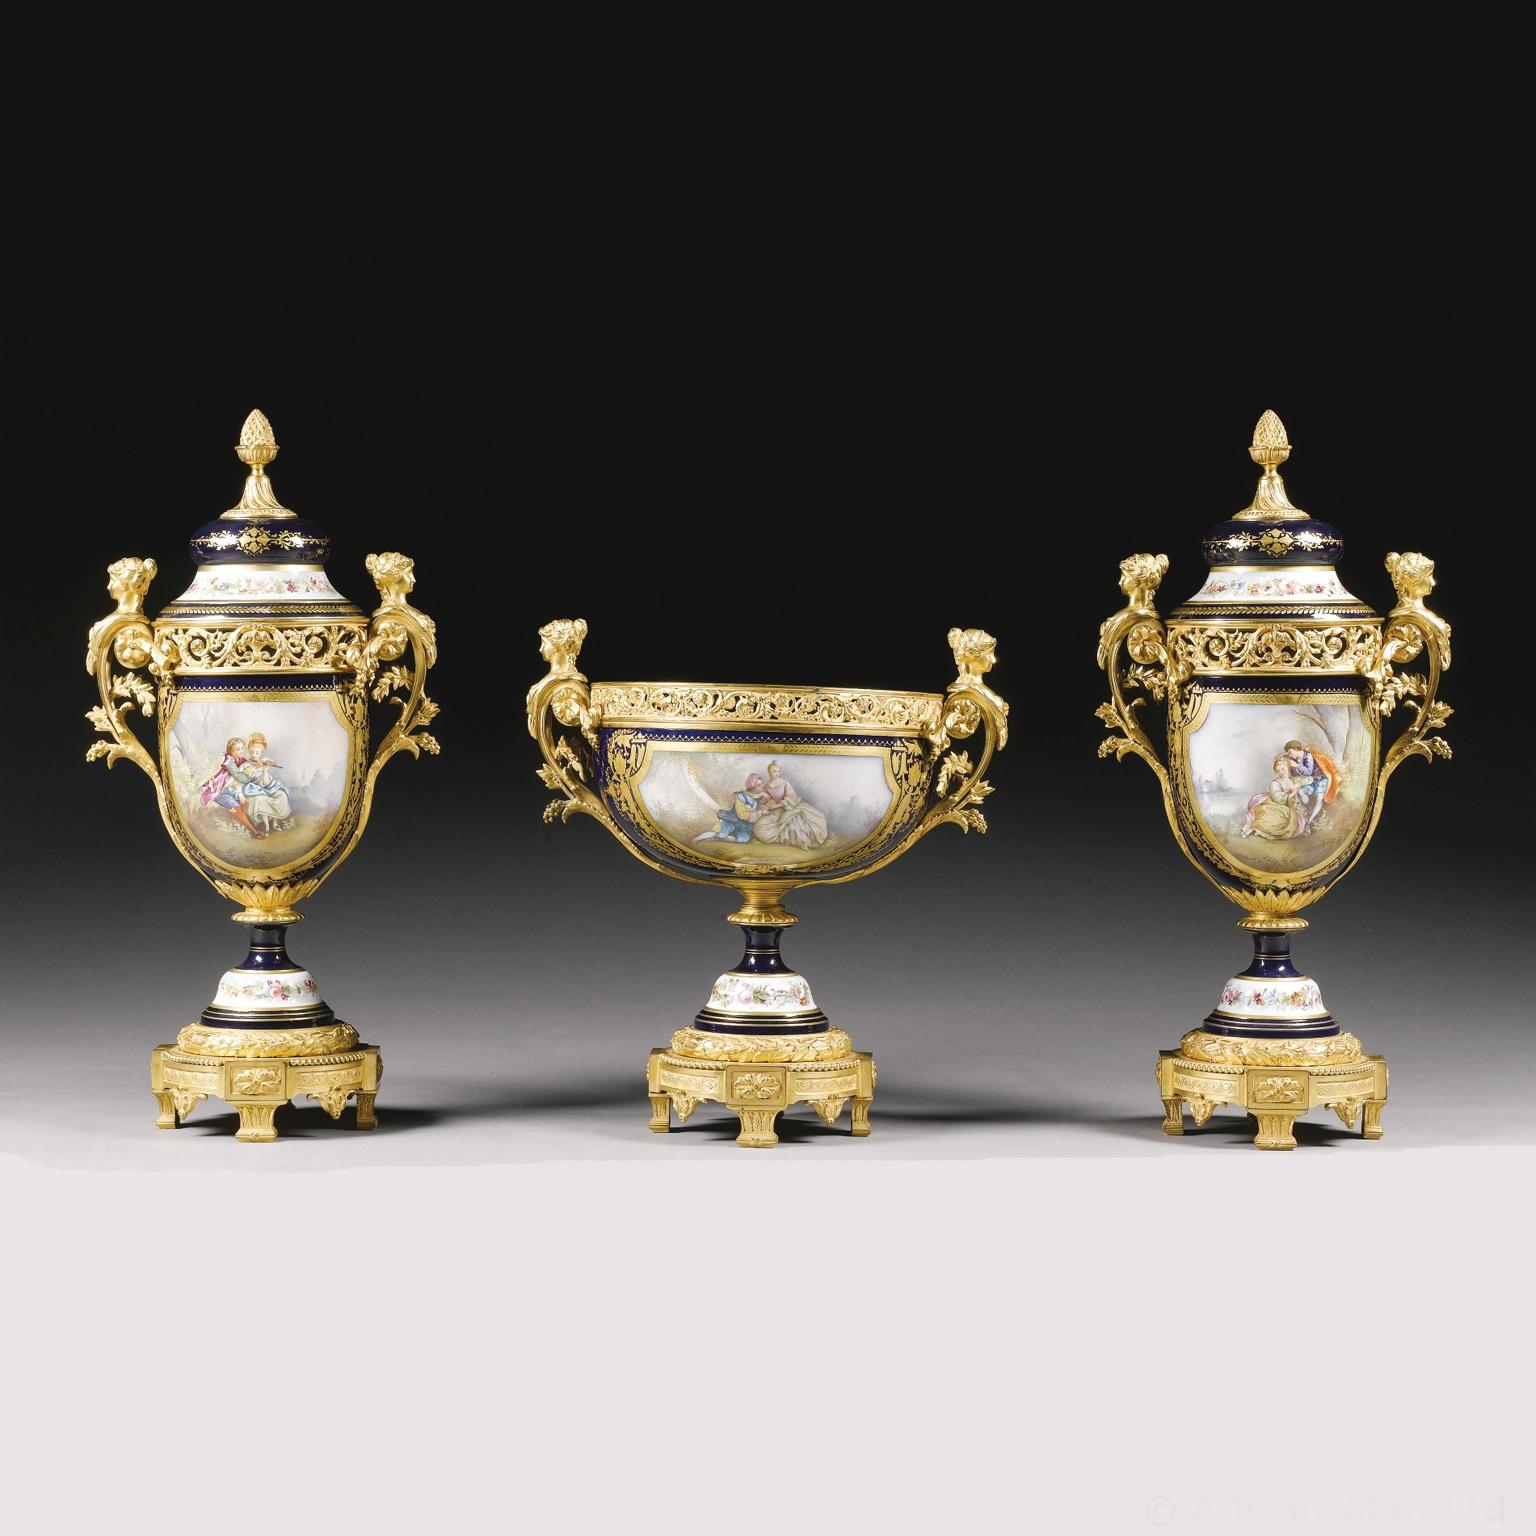 A Napoléon III gilt-bronze mounted Sèvres style garniture set. Comprising a centrepiece and a pair of vases with lids, by 'Robert'.

Each painted on the reverse with bouquets of flowers, to the front with romantic scenes, and mounted with bronze